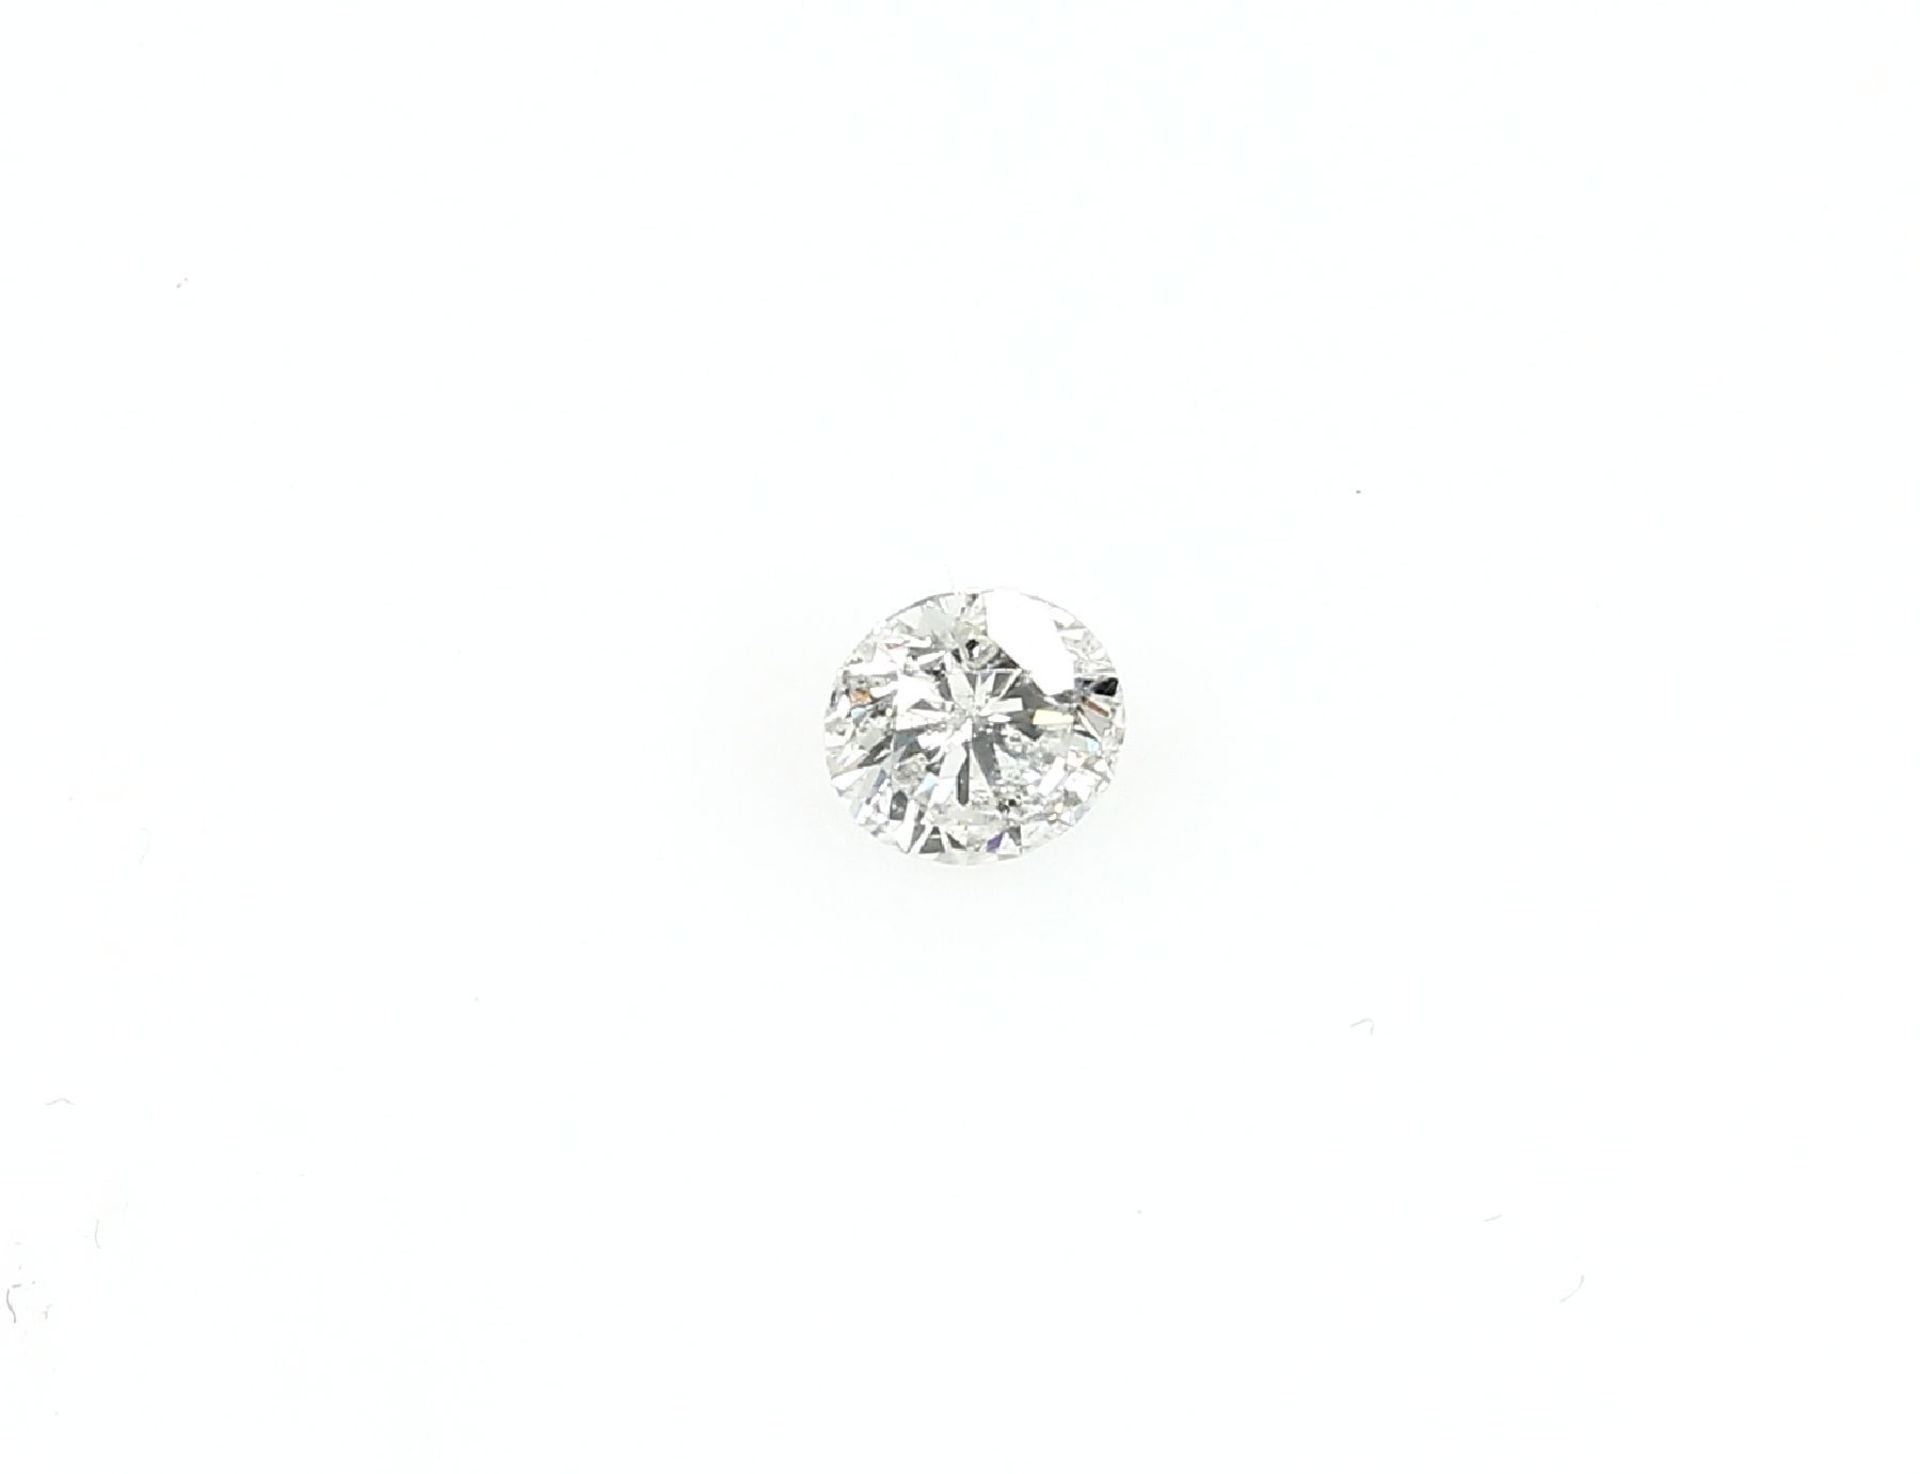 Loose brilliant, 0.61 ct Top Wesselton(G)/si2,IGL expertise copy attached Valuation Price: 2050, -